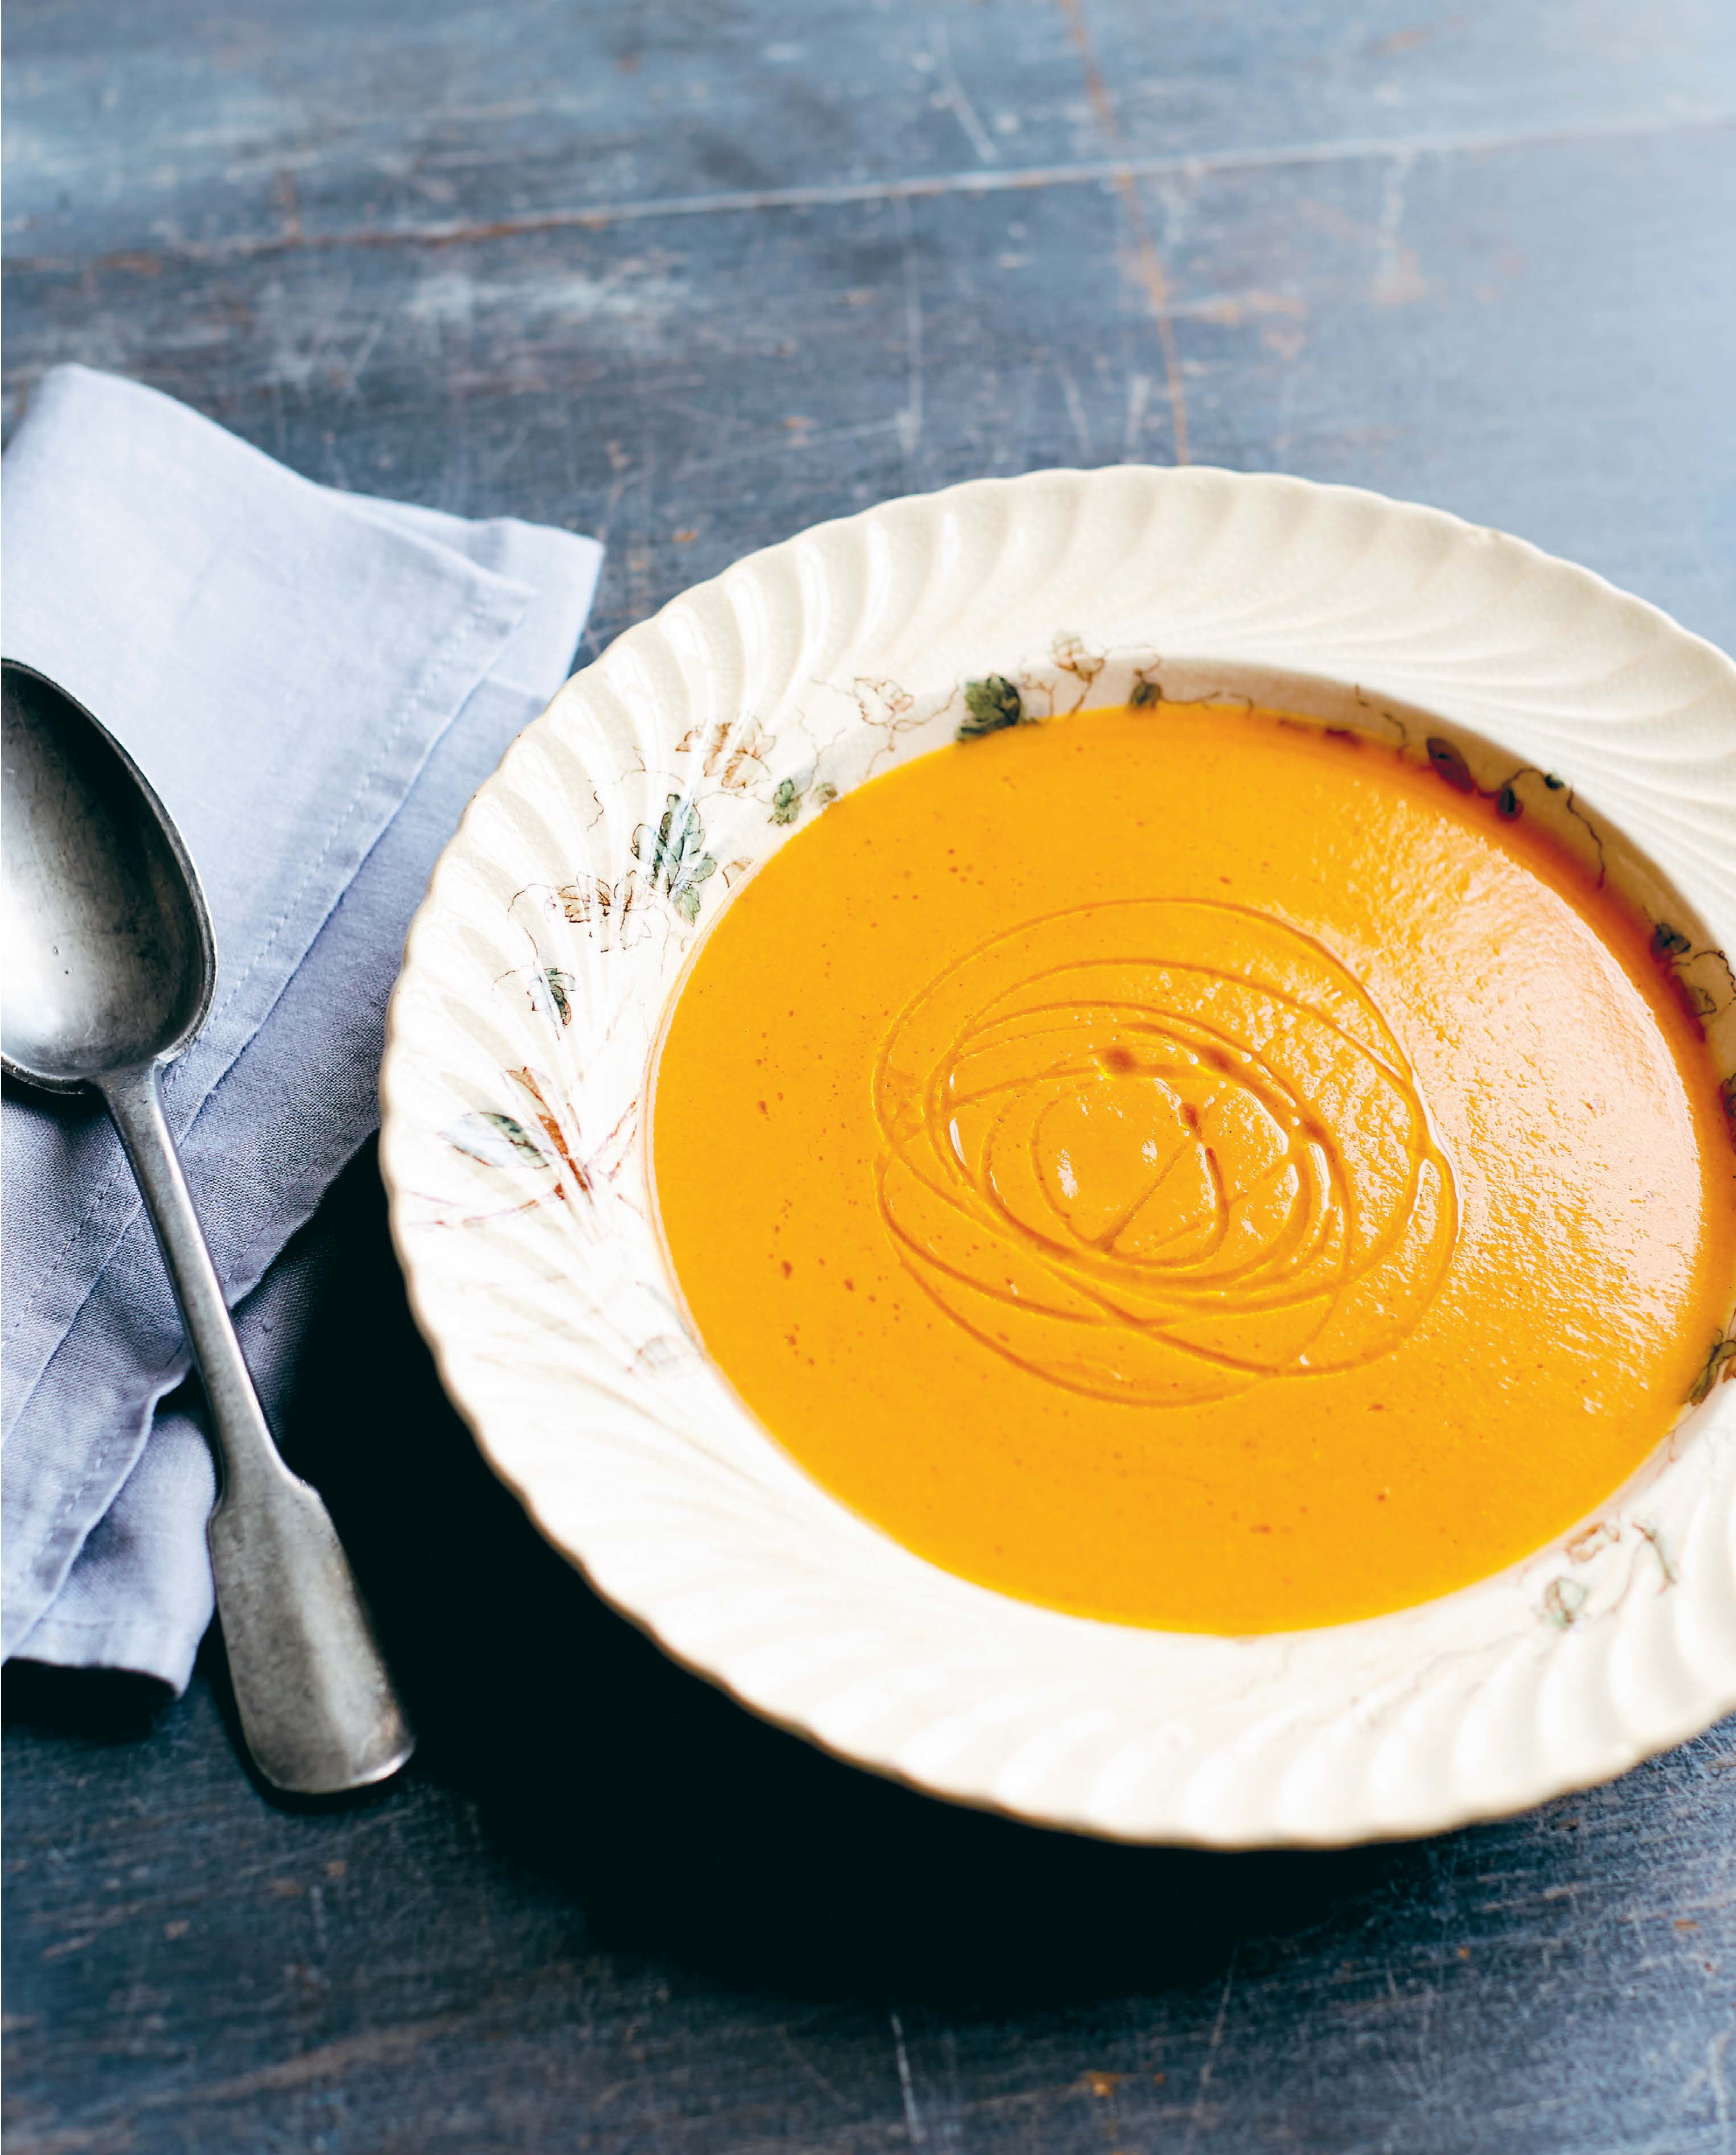 Carrot, capsicum and eggplant soup